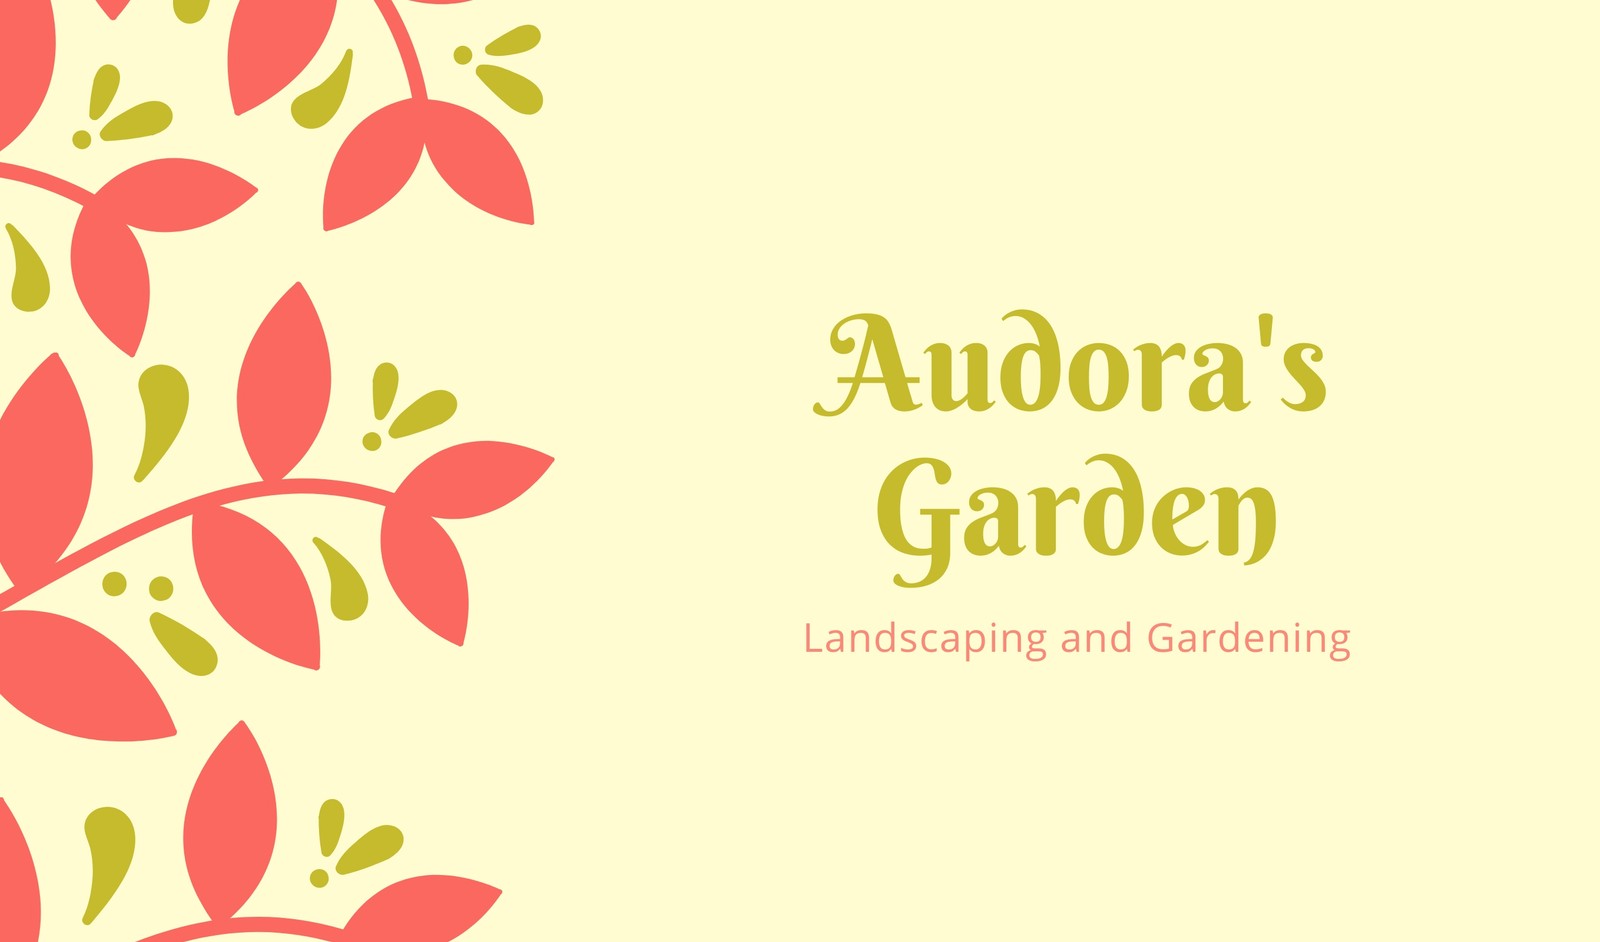 Free, printable custom landscaping business card templates  Canva Intended For Gardening Business Cards Templates